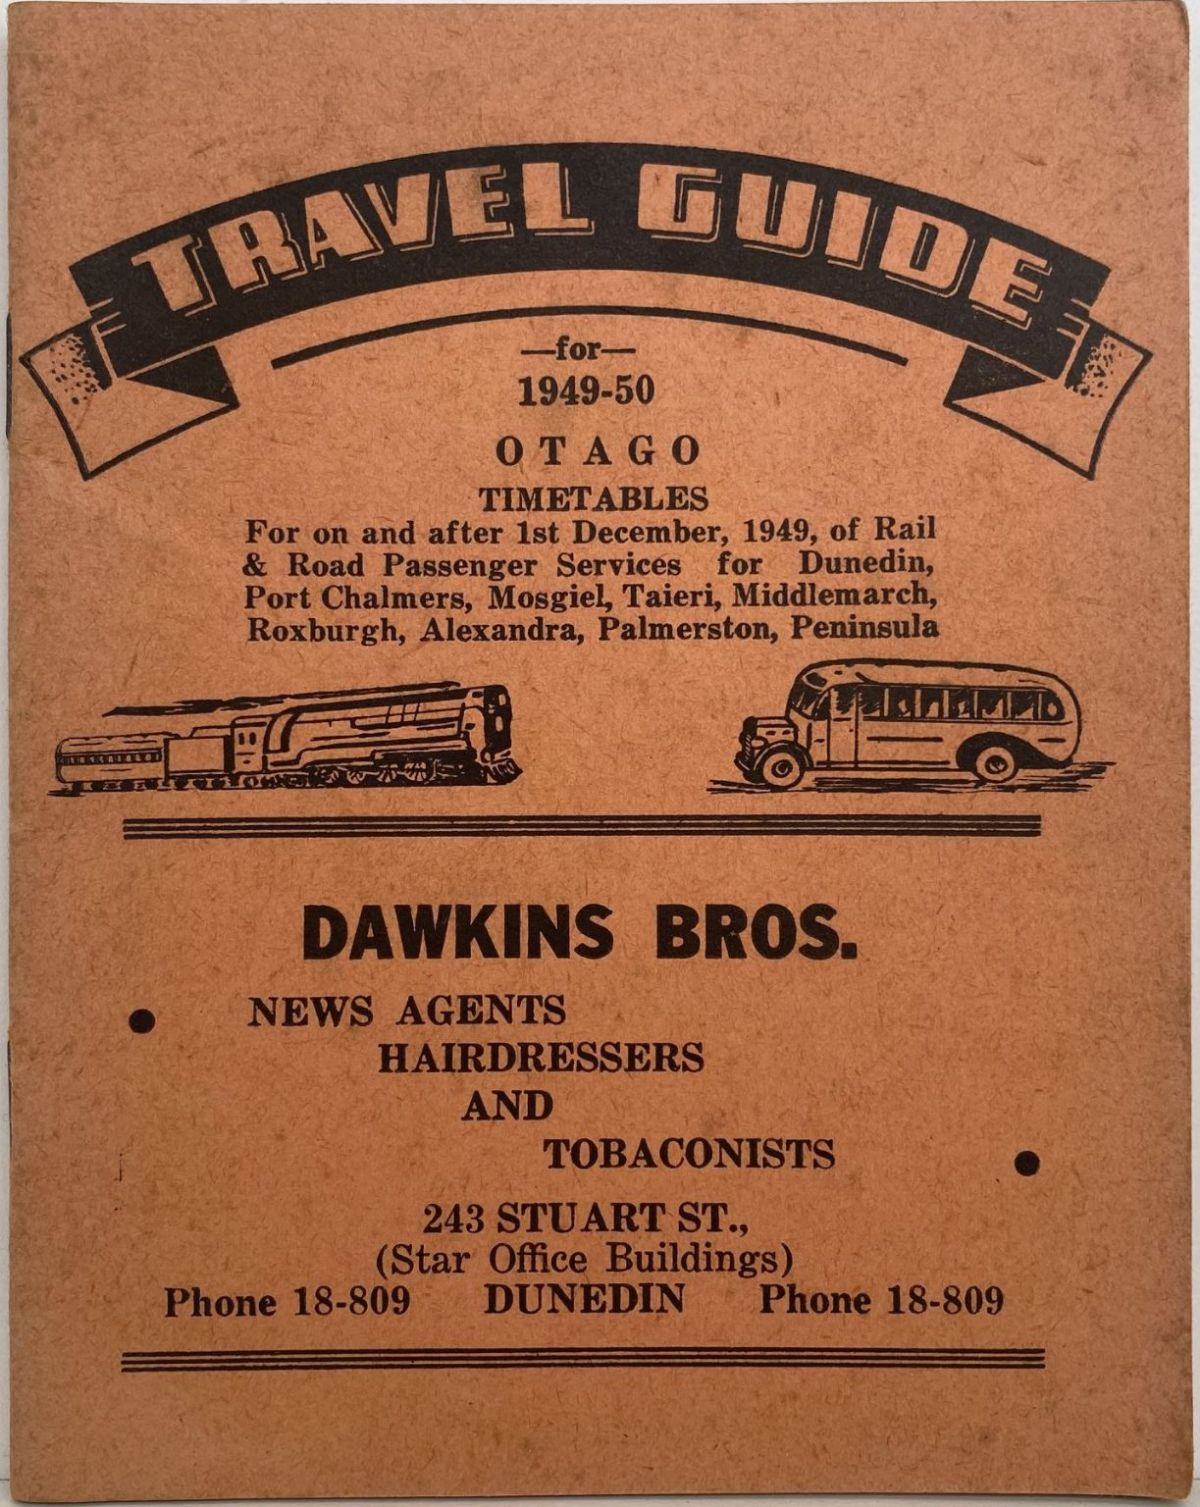 TRAVEL GUIDE: Otago Timetables for Rail and Road Passenger Services 1949 - 1950